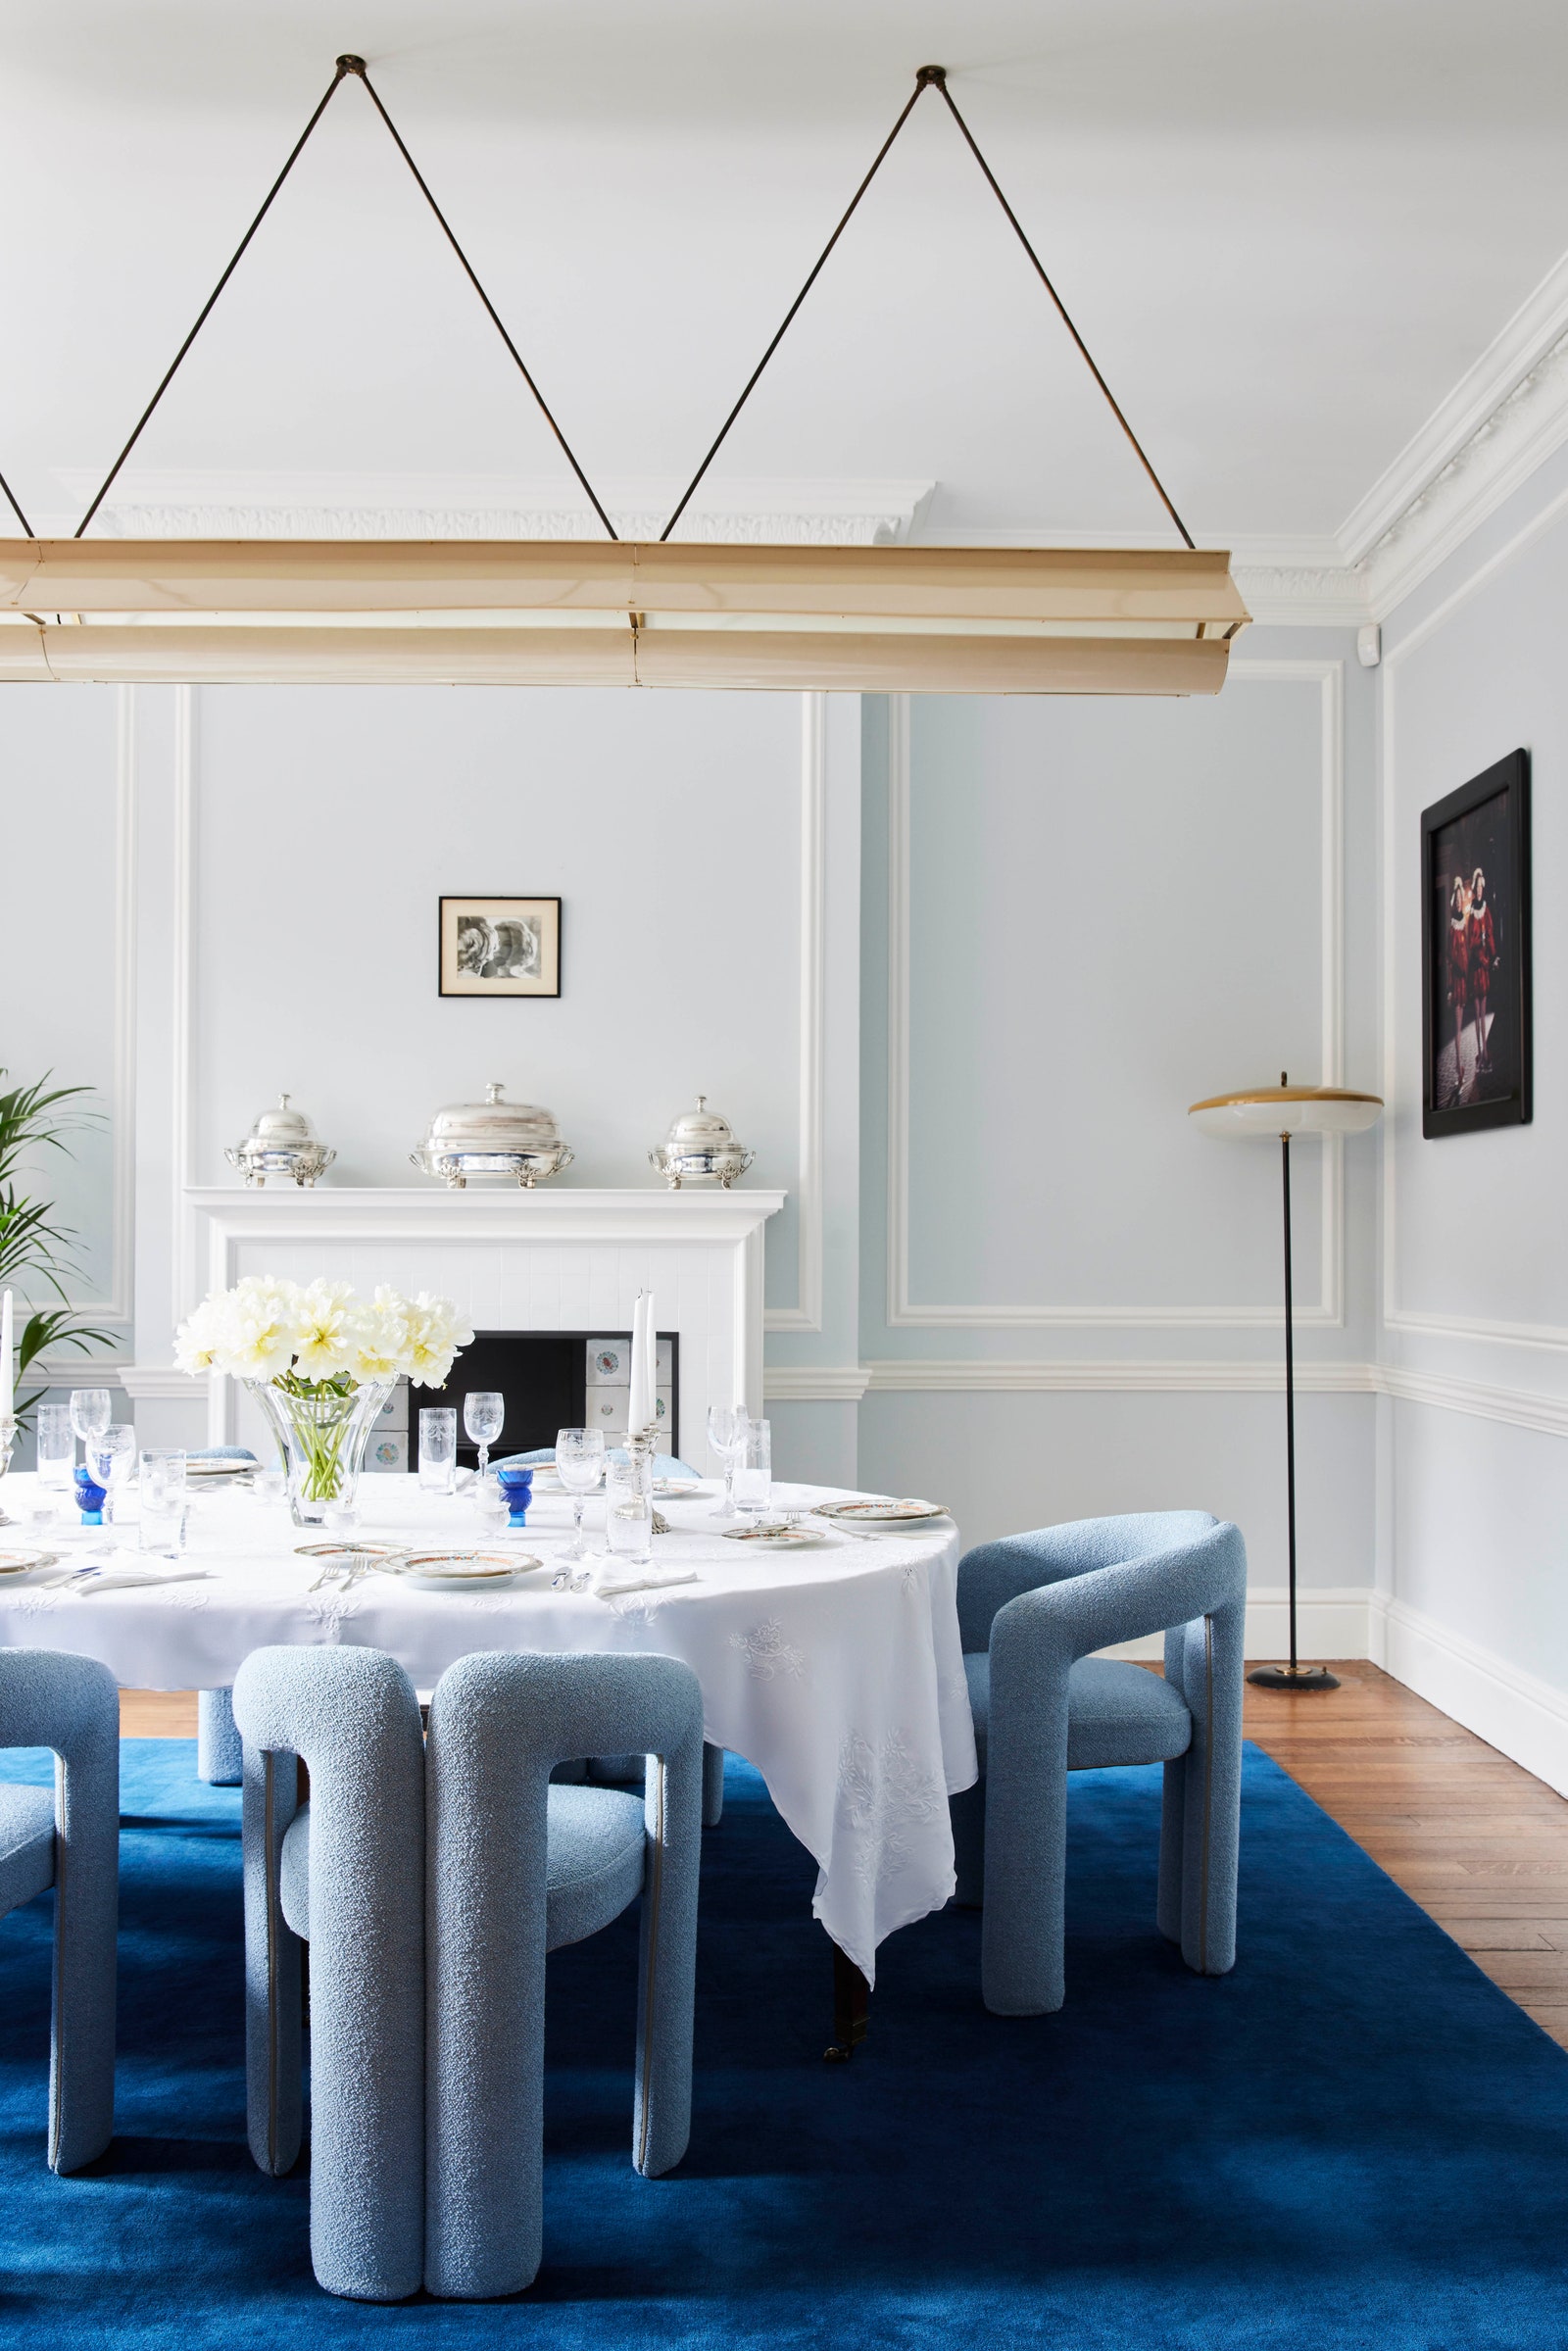 The bluetoned dining room